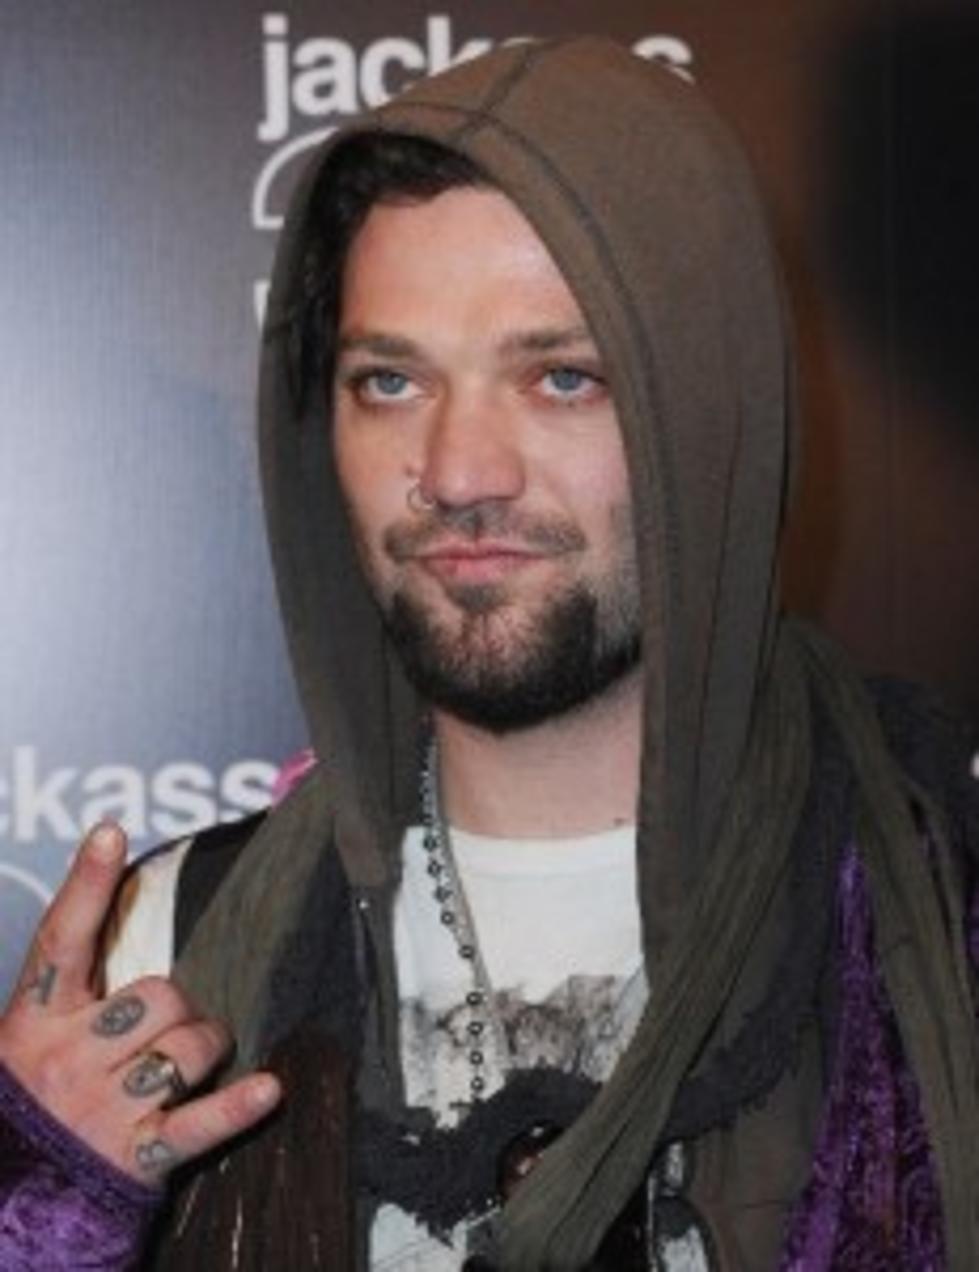 ‘Jackass’ Star Bam Margera Was Knocked Out By A Woman In Austin At This Year’s SXSW Festival